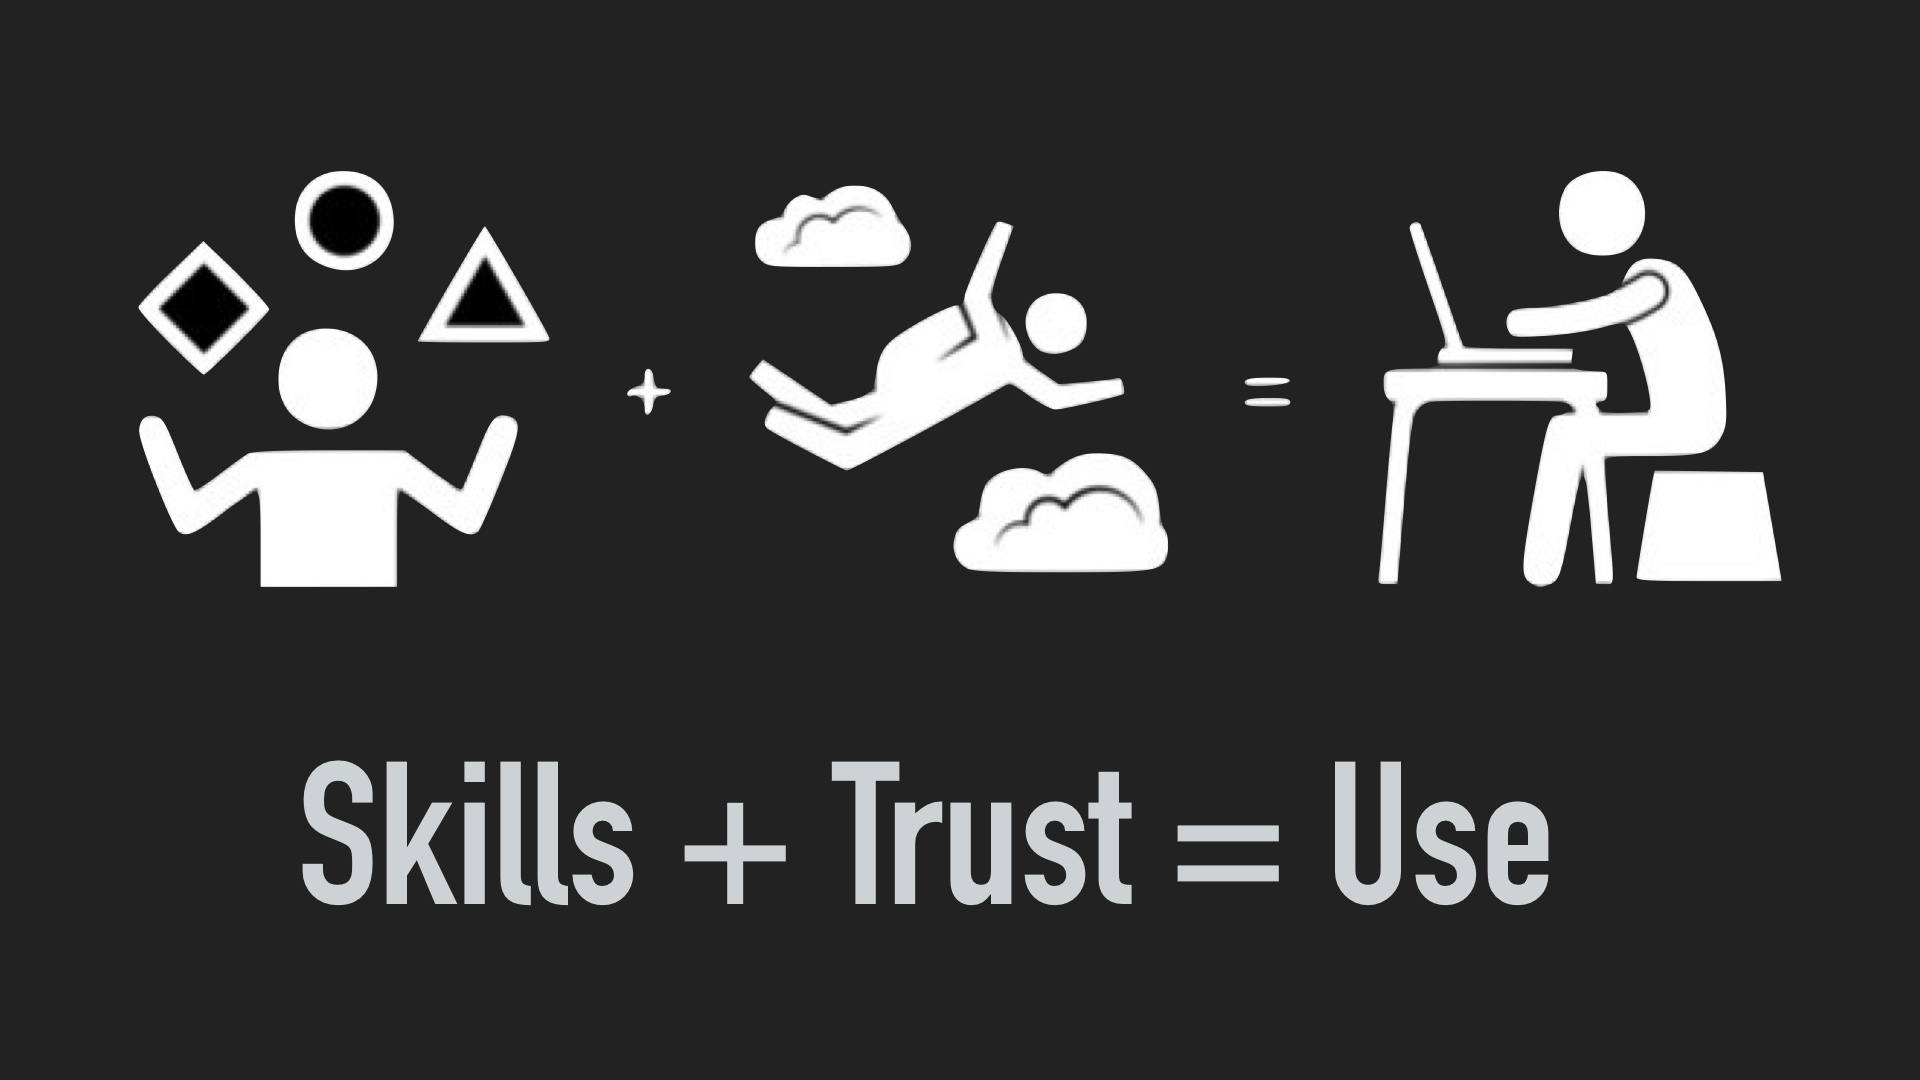 More image icons. Person juggling abstract shapes + person skydiving = person sitting at a desk with a laptop. Caption underneath: Skills + Trust = Use